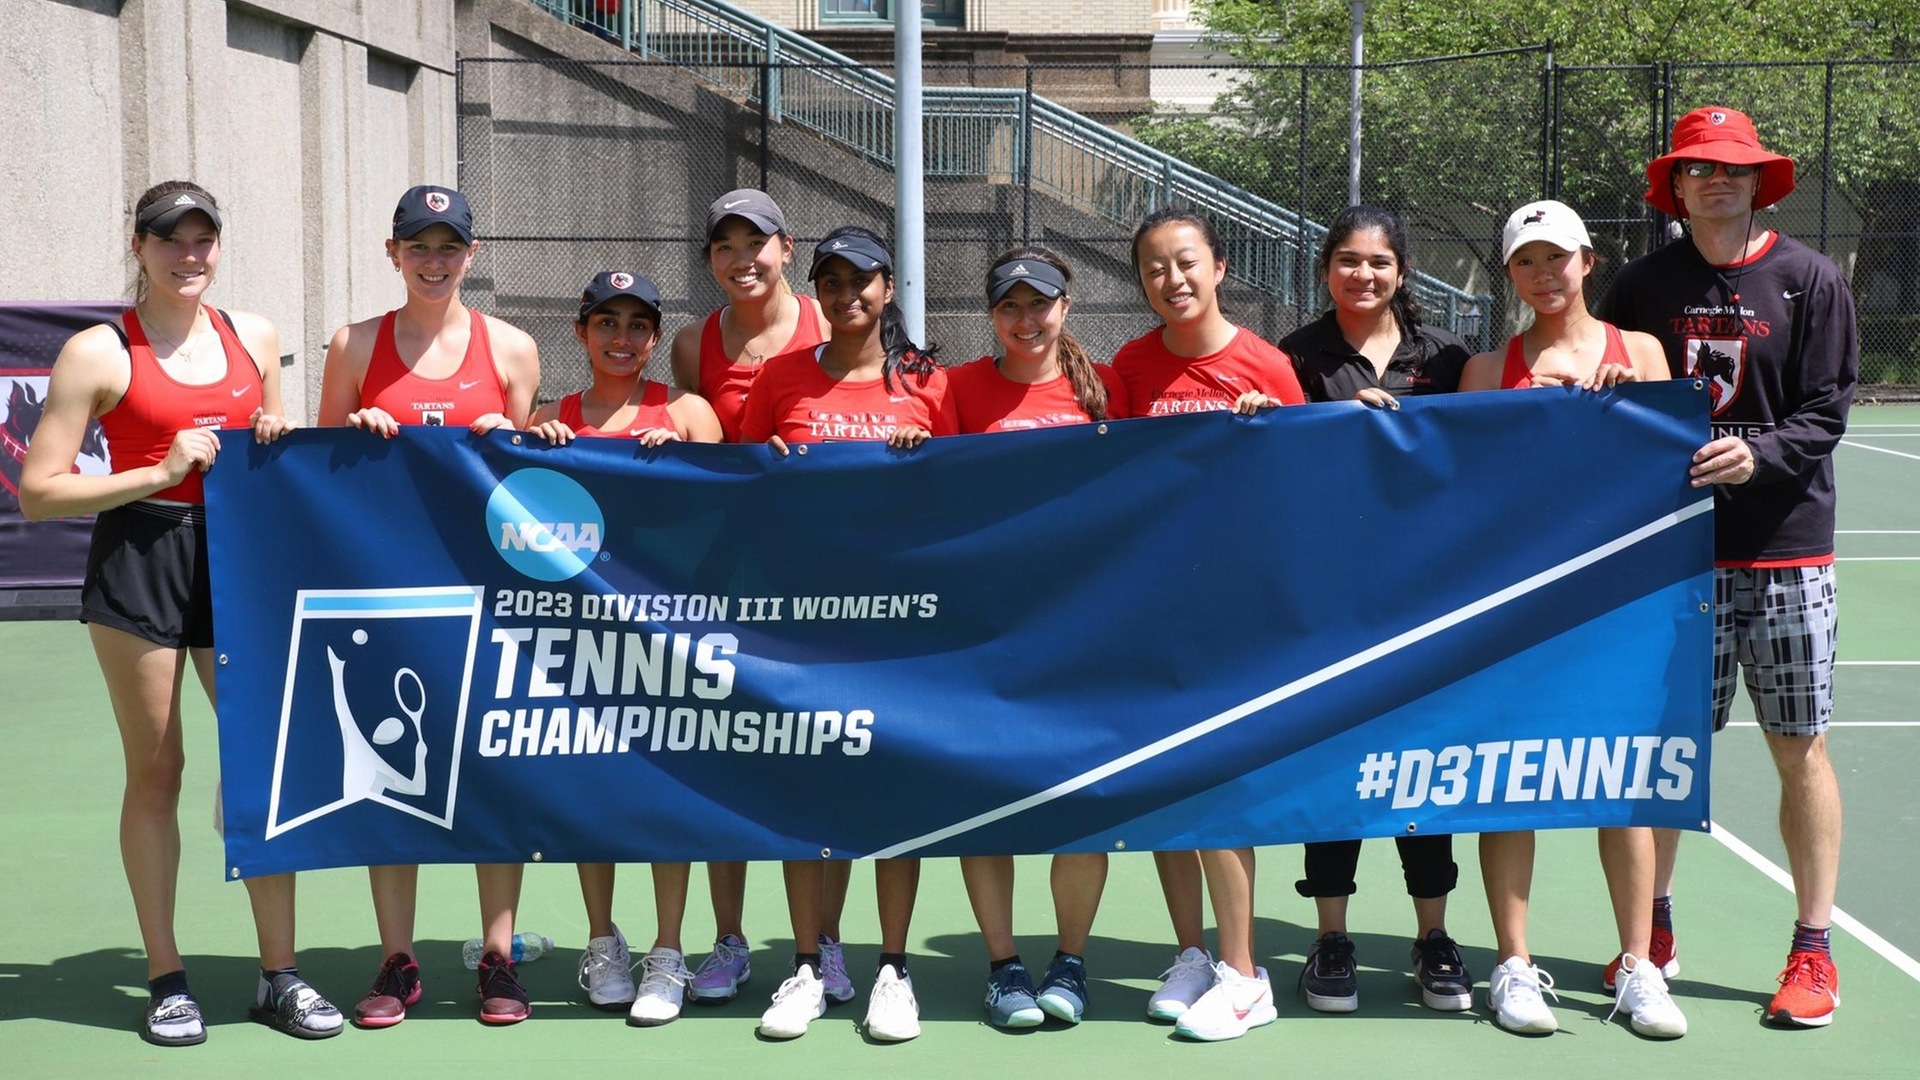 group photo of women's tennis team holding the NCAA championship banner and wearing red tank tops and black hats 